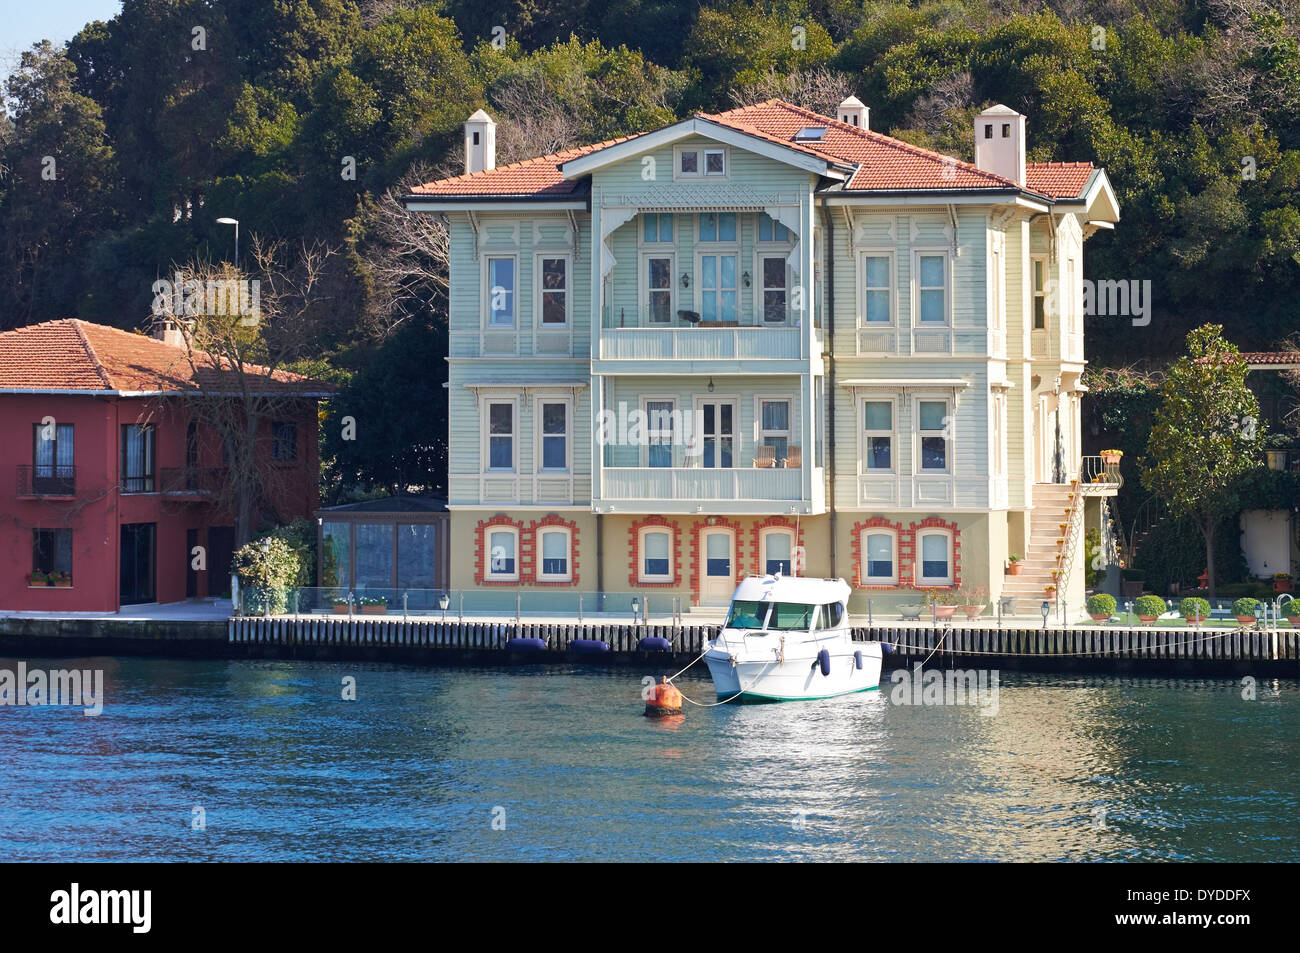 Architecture on the Bosphorus Strait. Restoration of wooden mansions, Istanbul in Turkey. Stock Photo